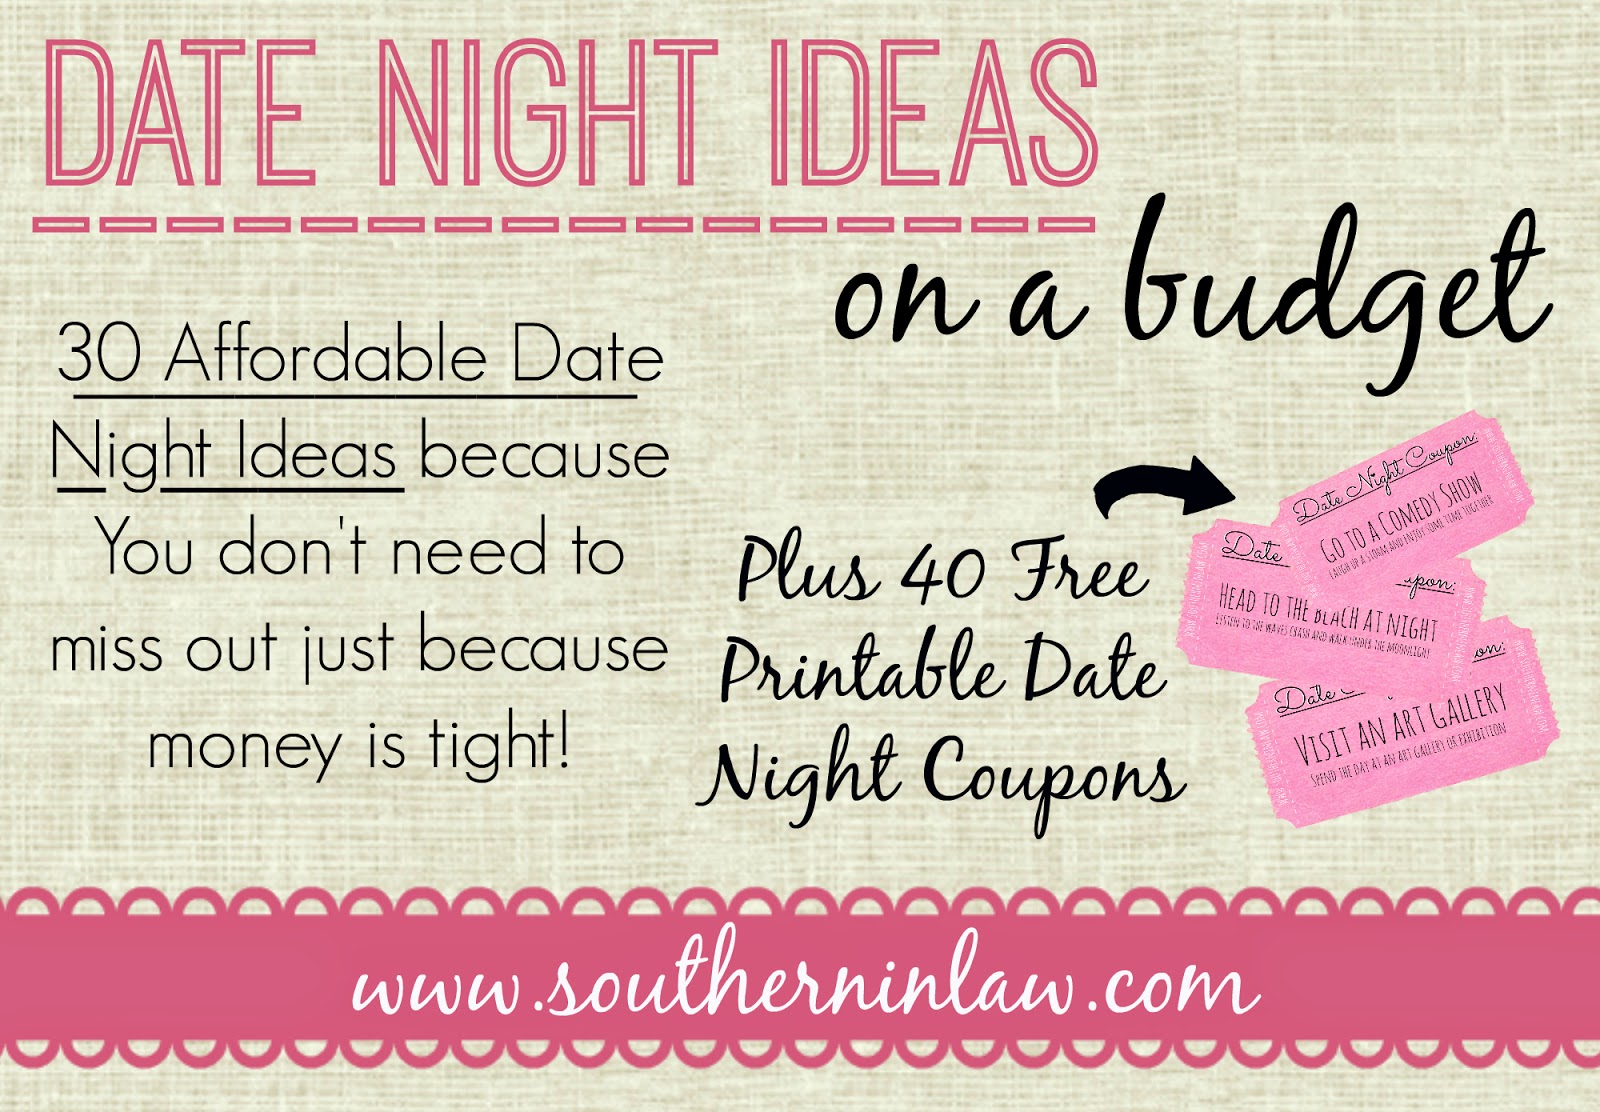 Cheap Date Night Ideas - Date Night Coupons - Date Ideas on a Budget